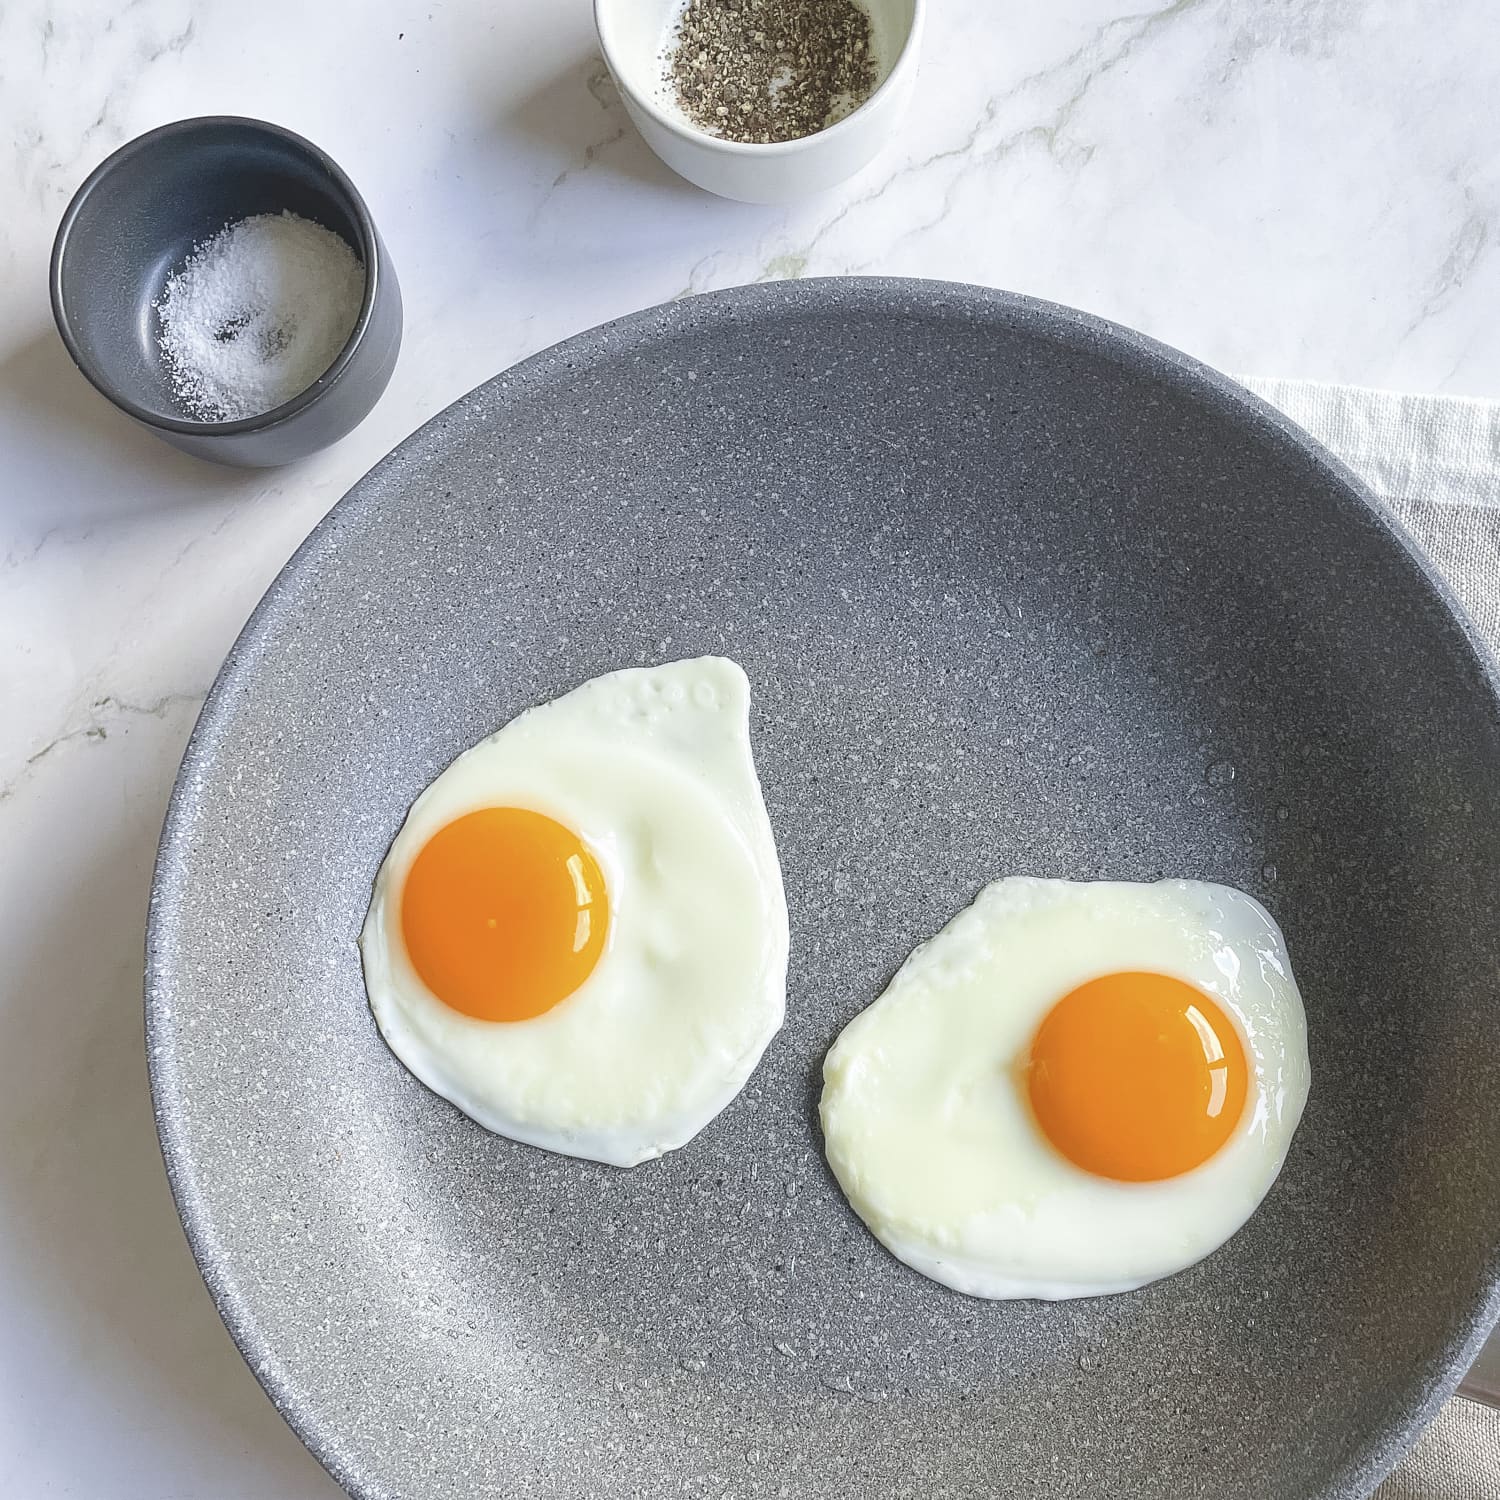 How To Make Perfect Sunny Side Up Eggs, The Easiest Way